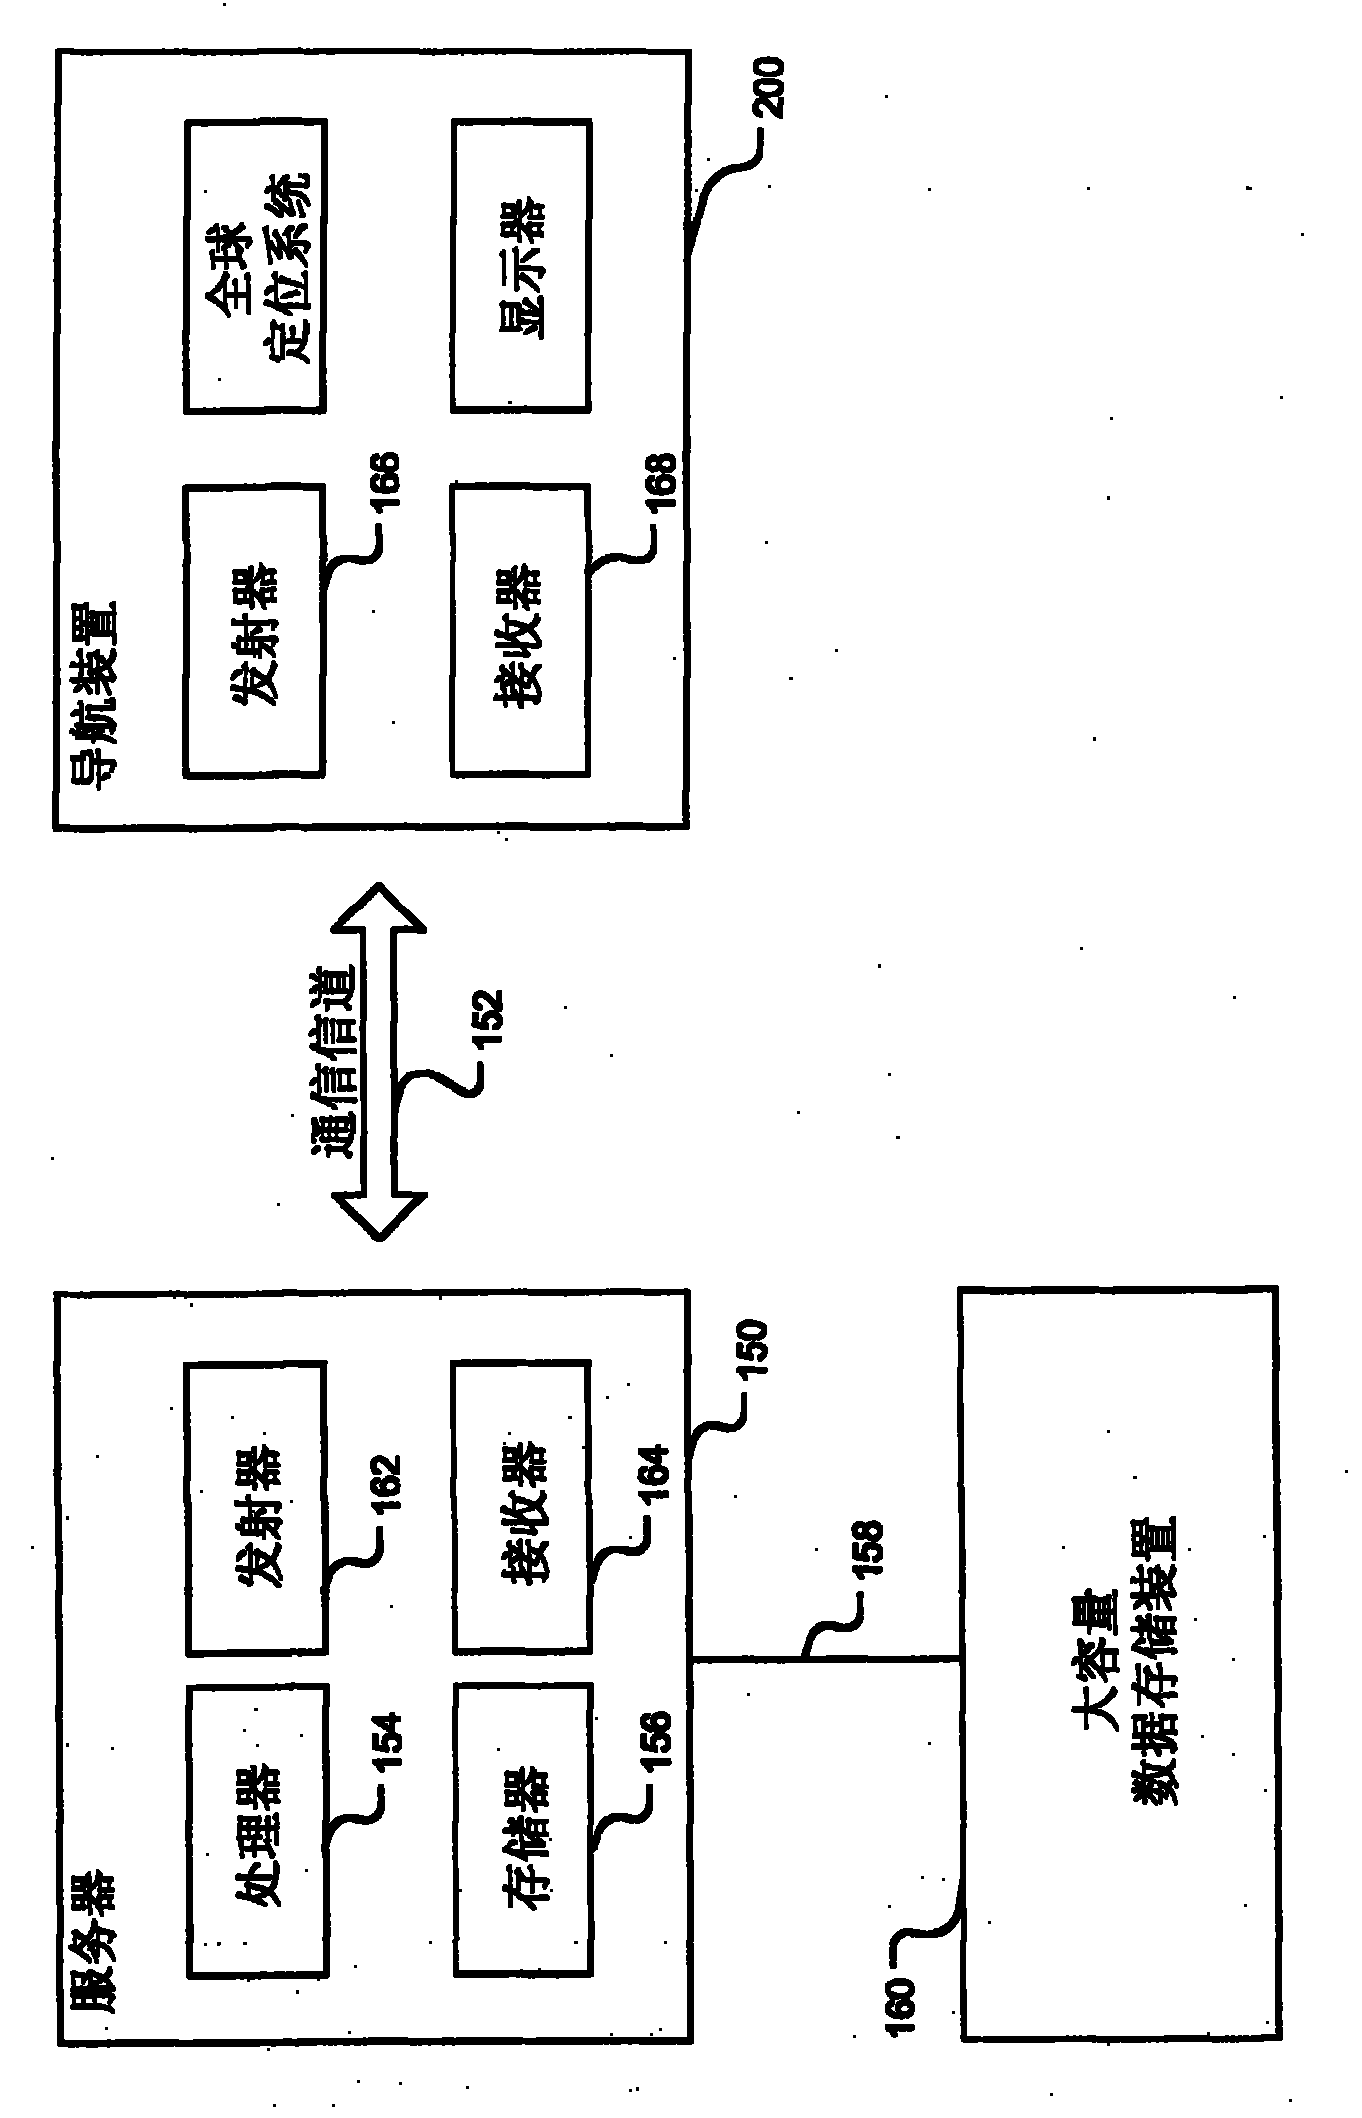 Improvements relating to navigation apparatus used in-vehicle